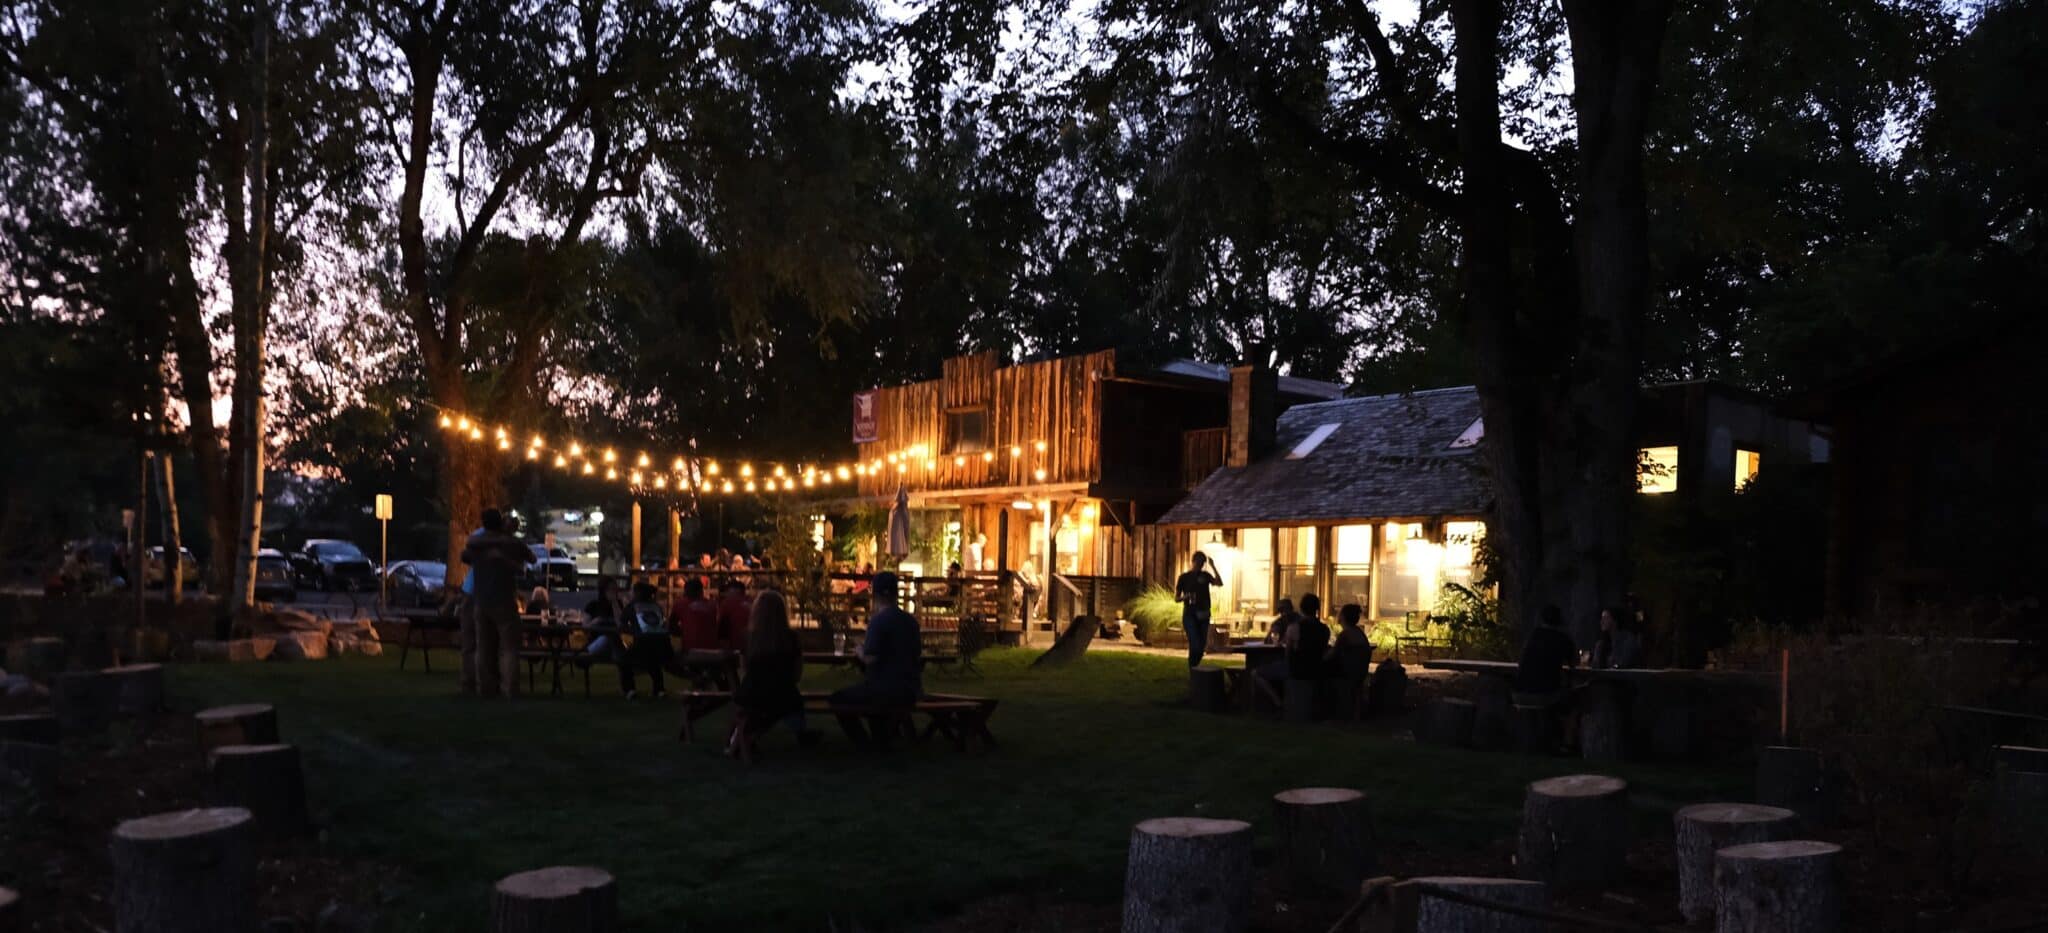 Image of Stodgy Brewing Company at night in Fort Collins, Colorado